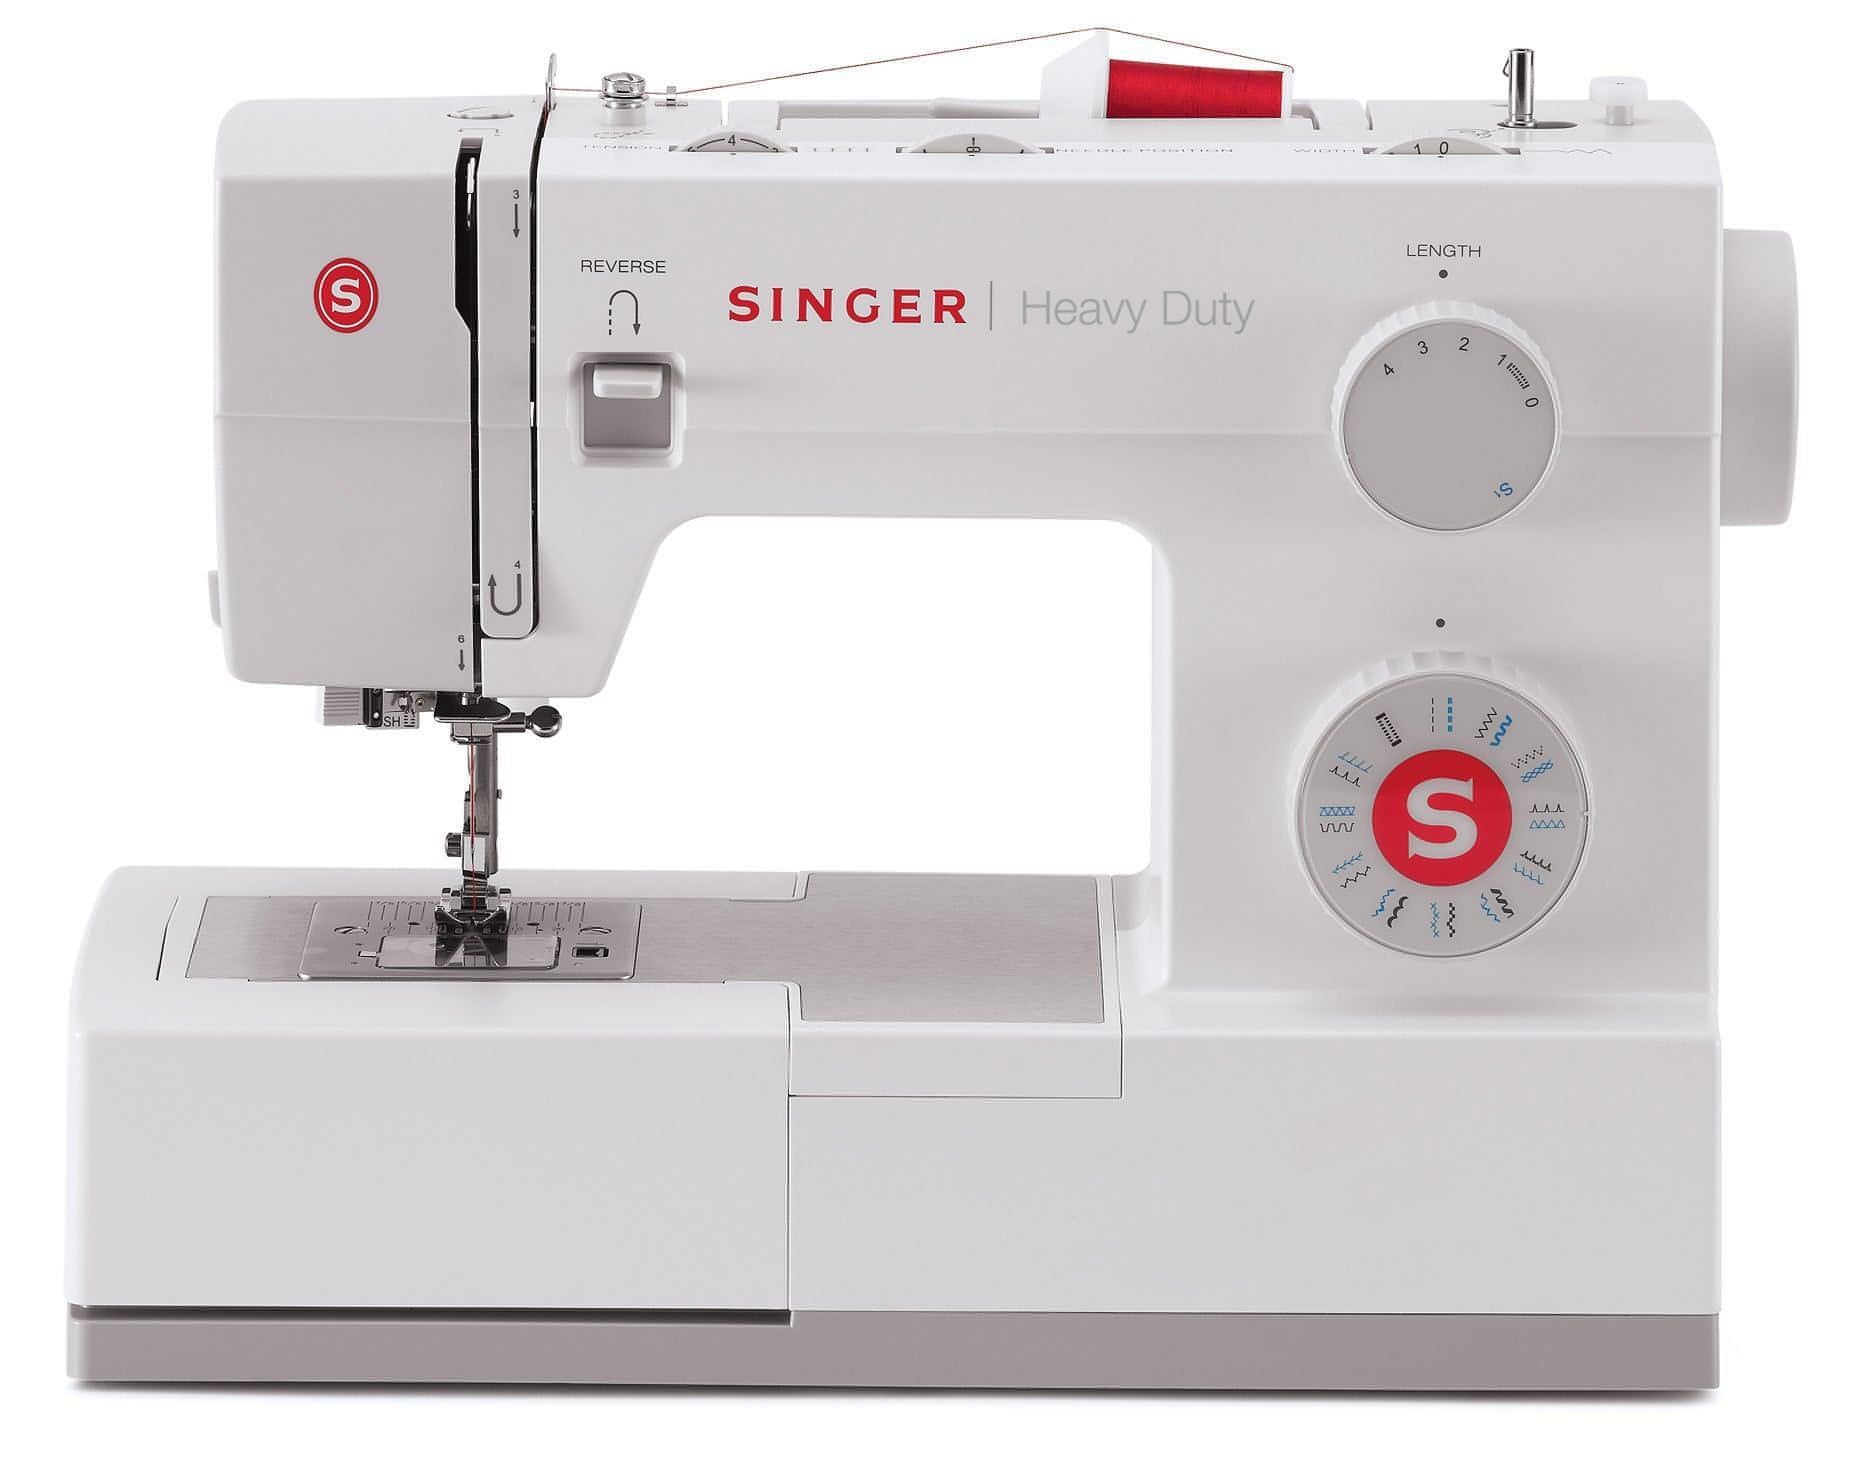 Singer Heavy Duty 4423 Sewing Machine - Robust and Versatile